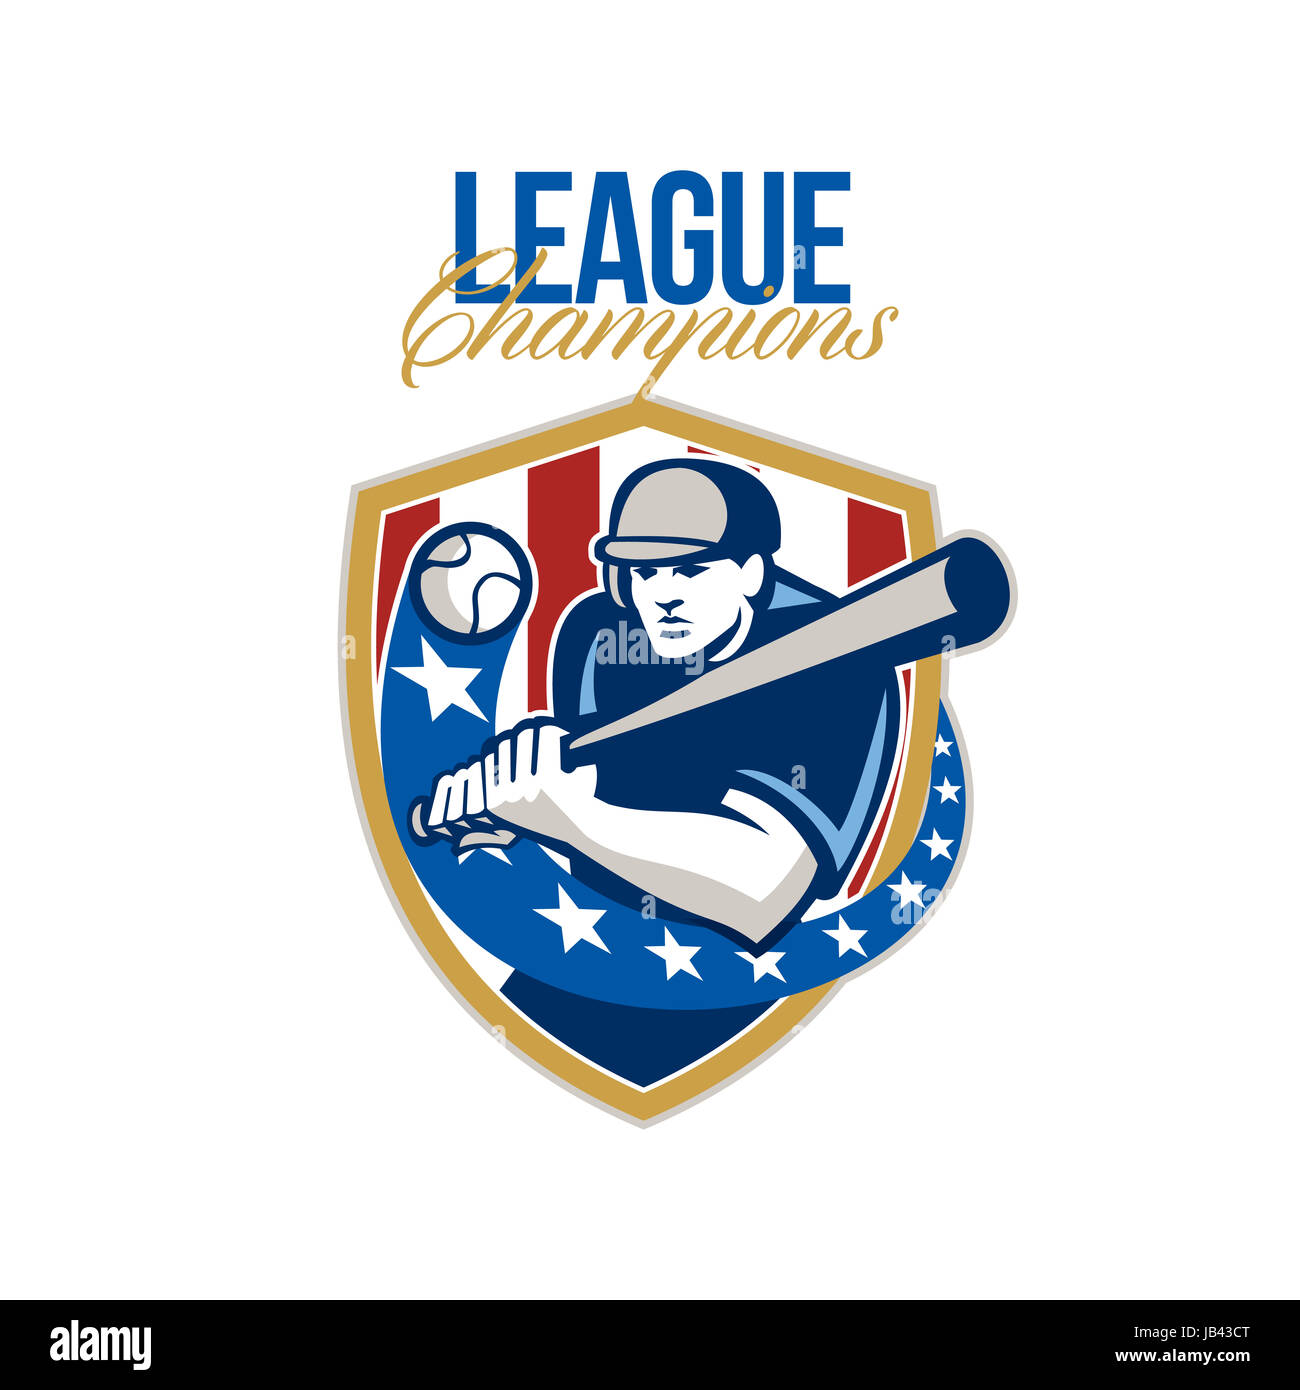 Illustration of a american baseball player batter hitter holding bat batting set inside crest shield shape with stars and stripes done in retro style with words League Champions. Stock Photo